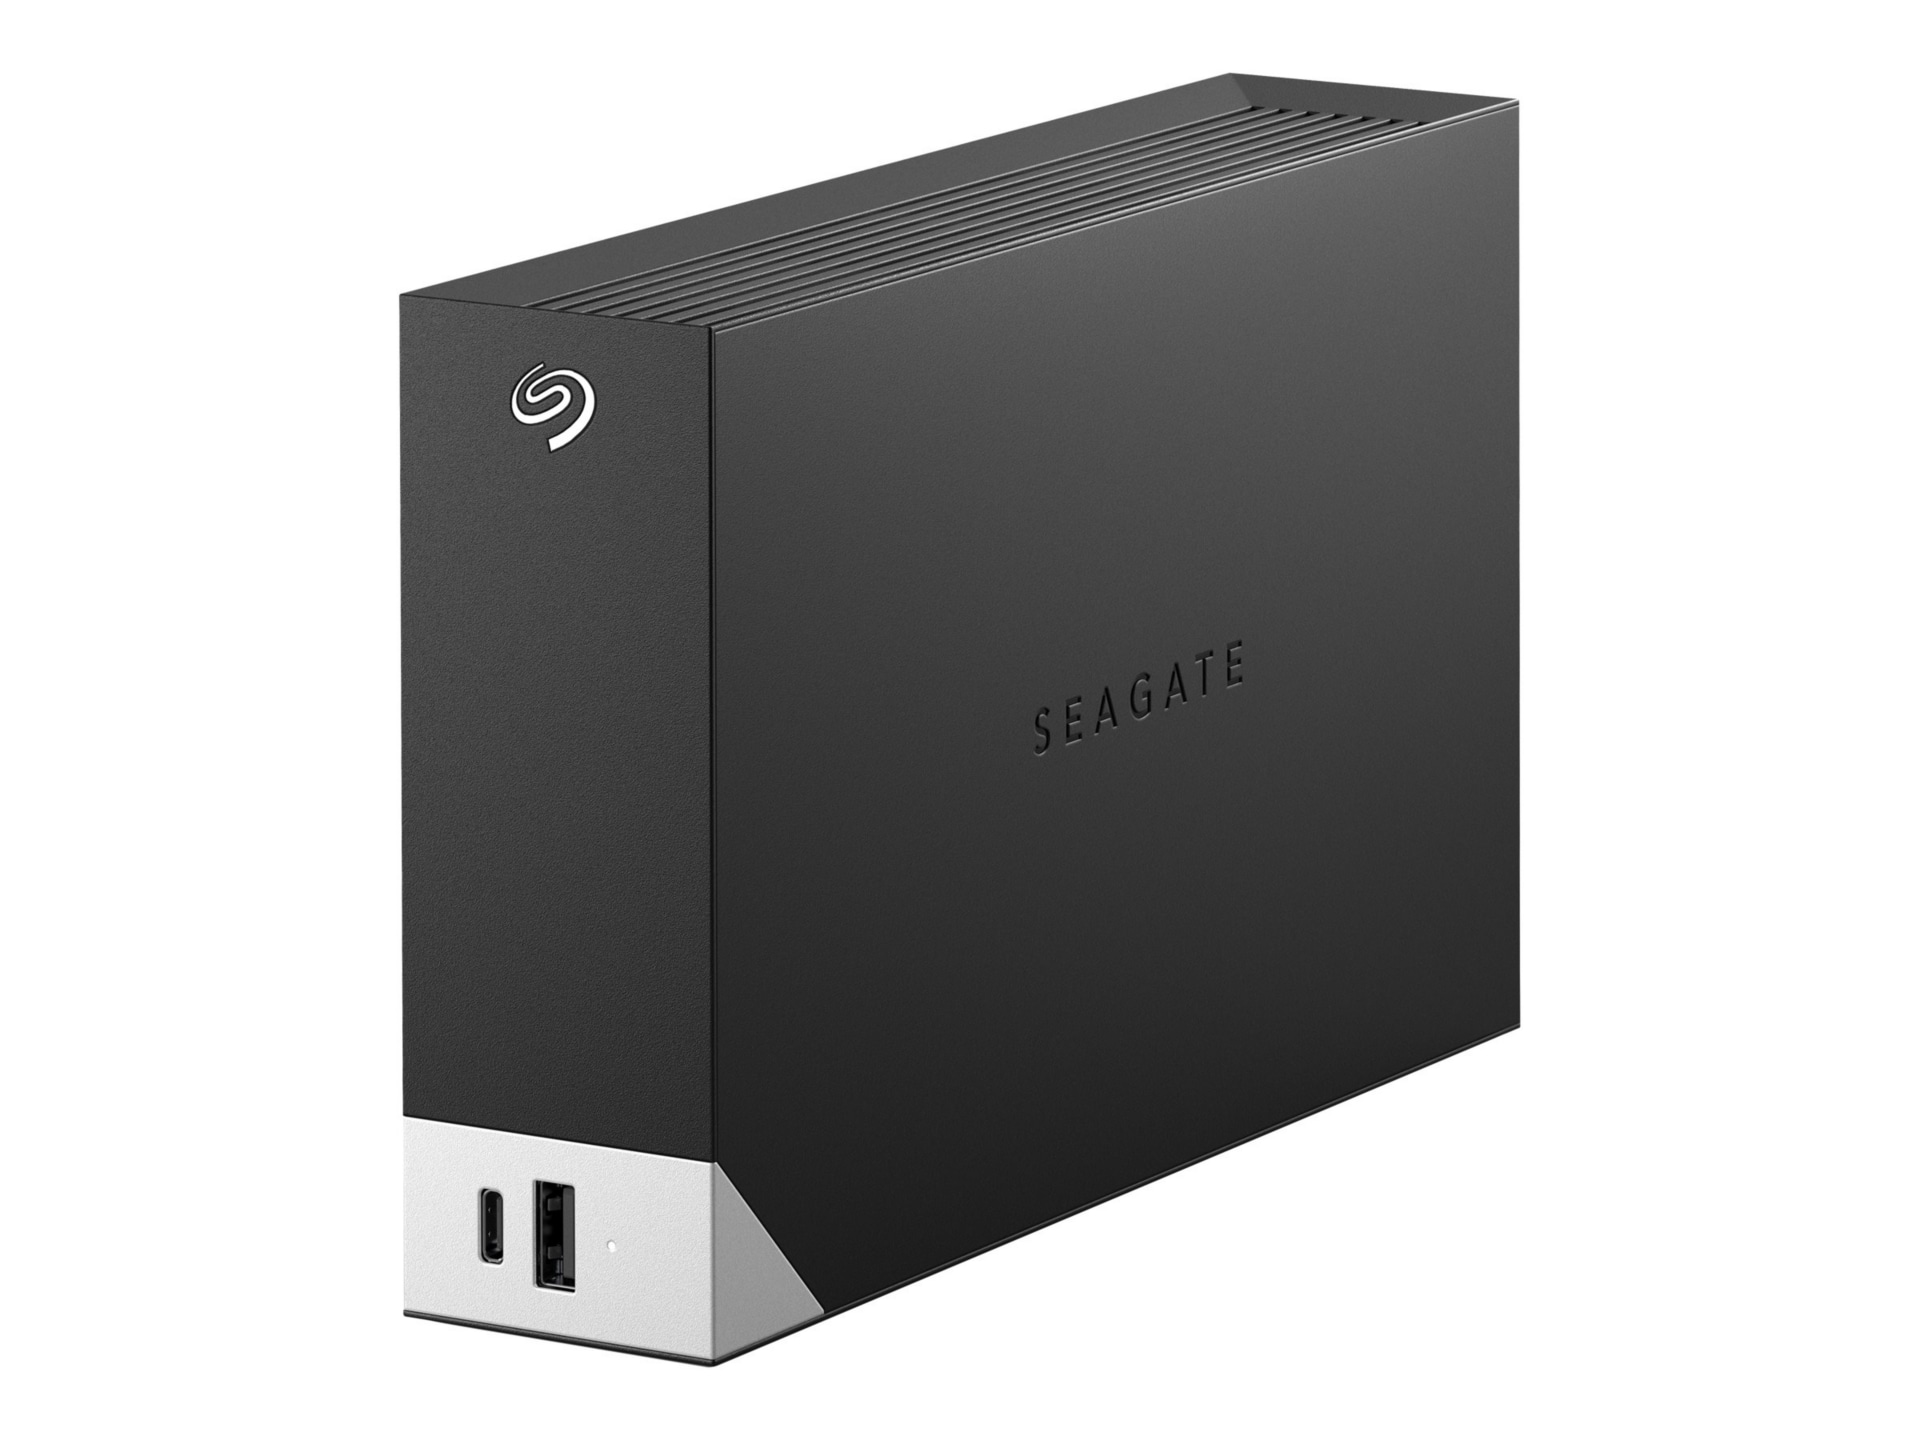 Seagate One Touch with hub STLC8000400 - hard drive - 8 TB - USB